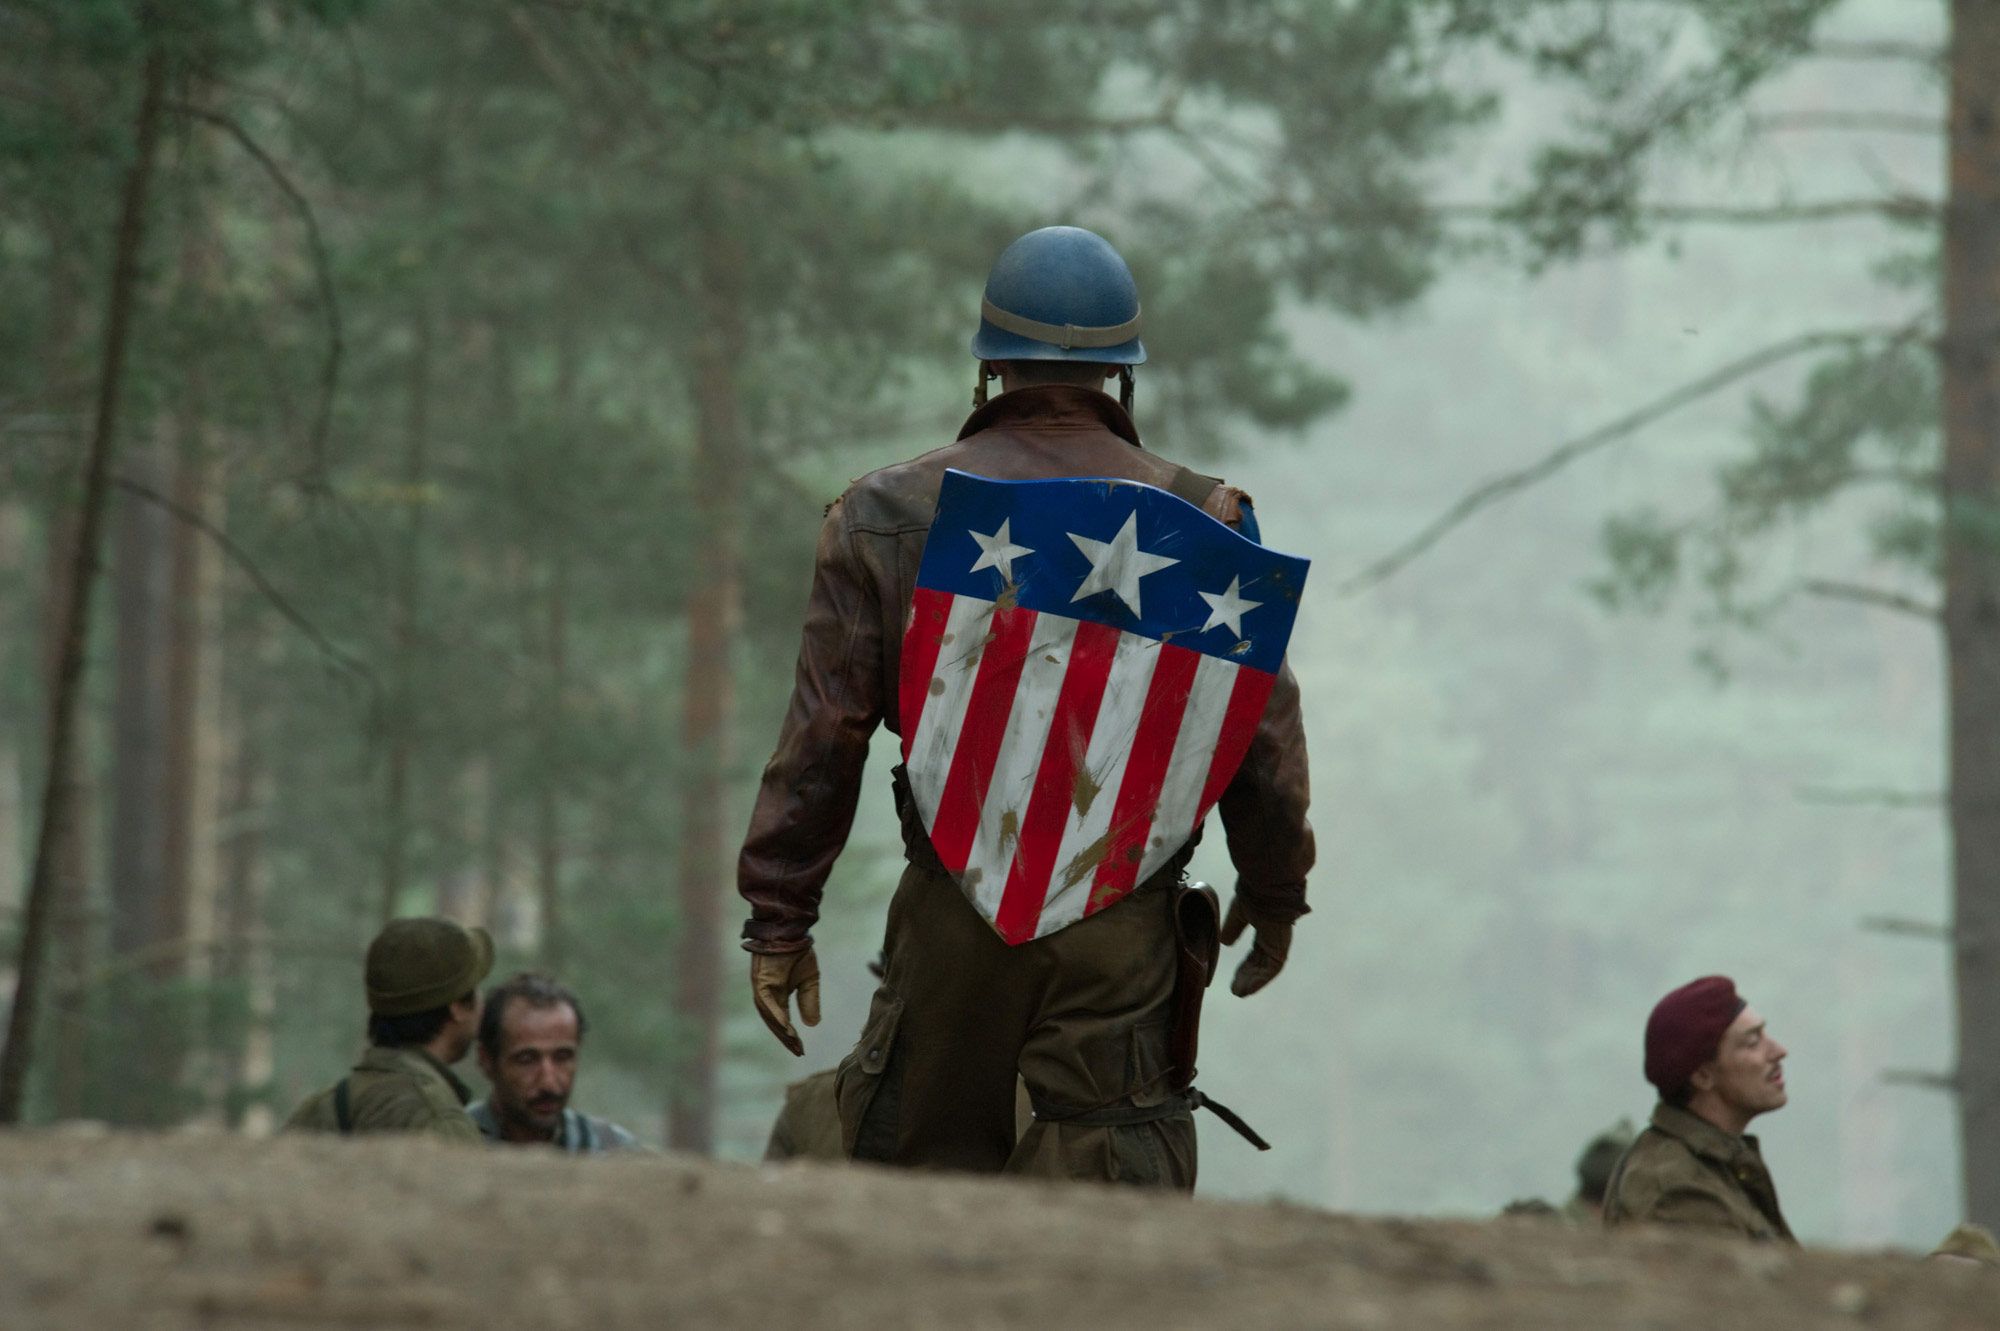 Chris Evans' iconic shield in Captain America: The First Avenger